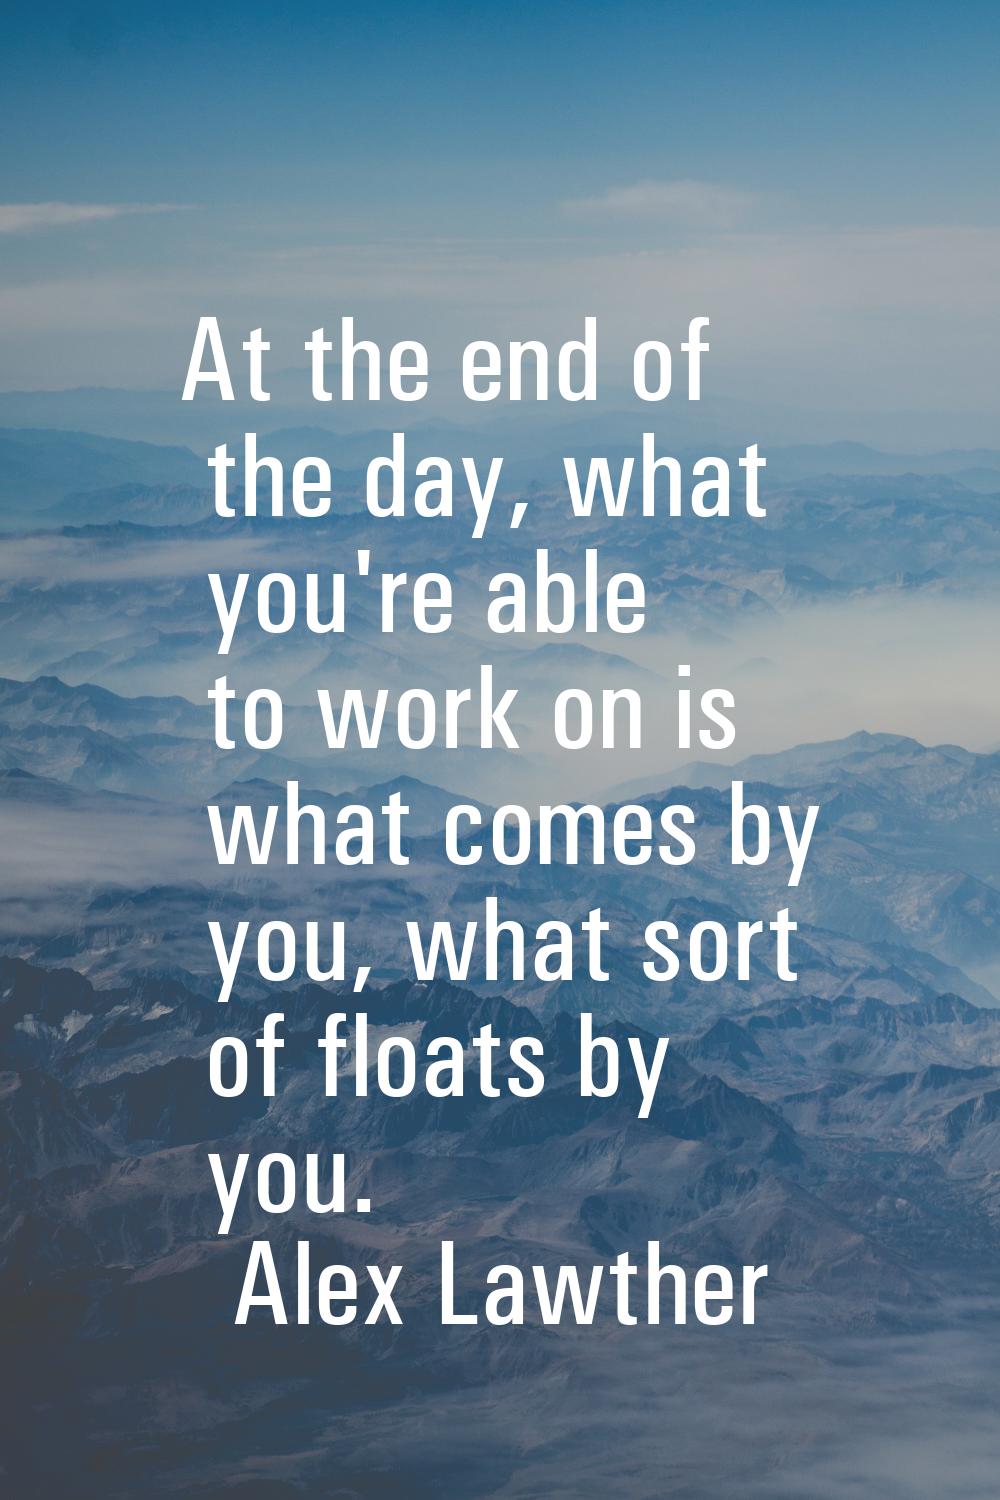 At the end of the day, what you're able to work on is what comes by you, what sort of floats by you